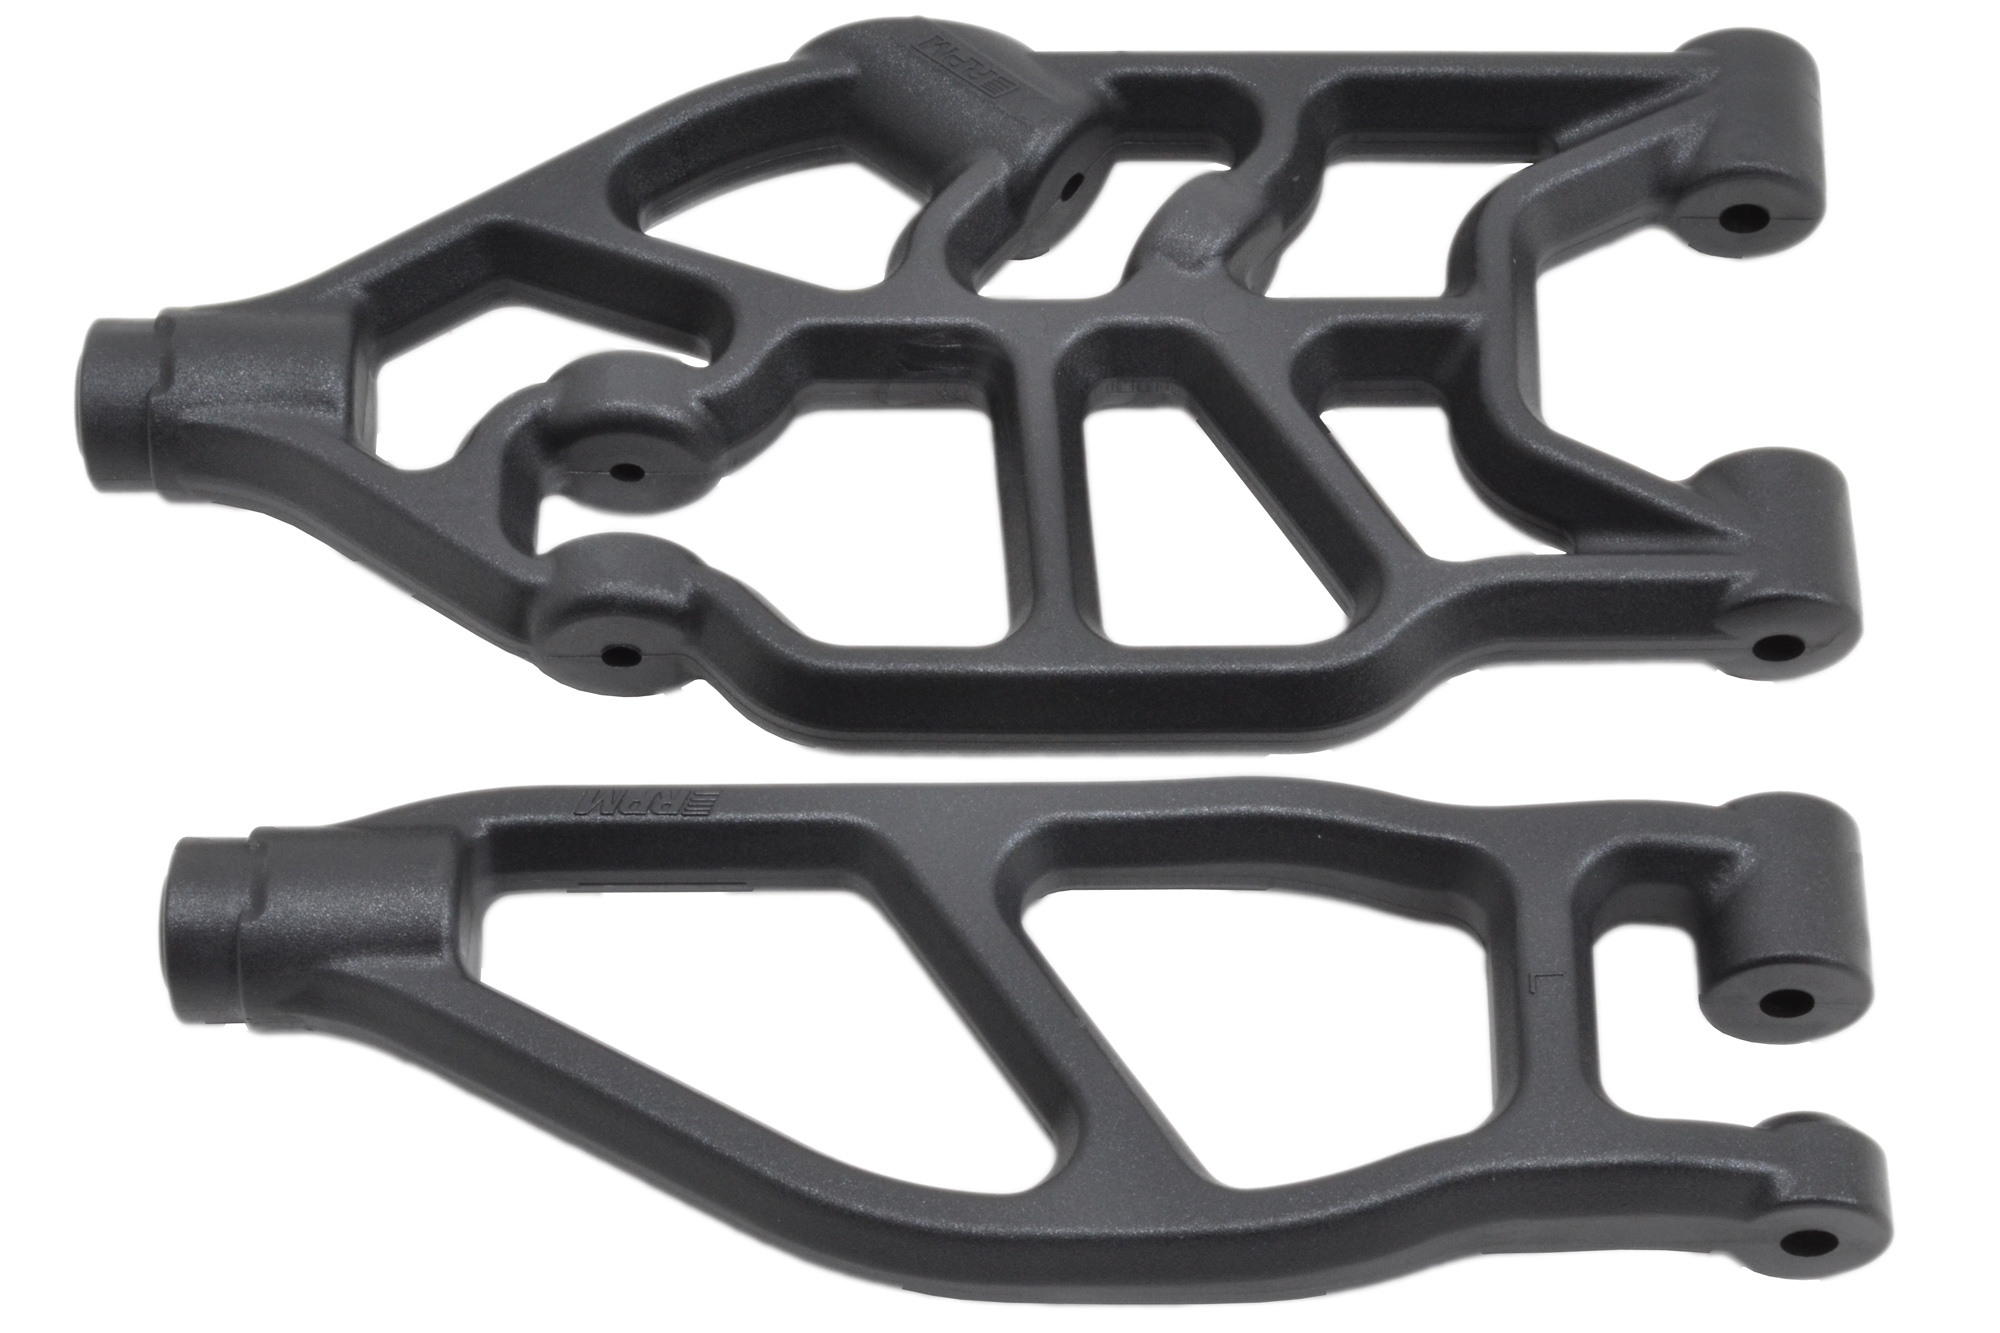 RPM Suspension Arms for the Arrma Kraton 8S & Outcast 8S - RC Driver